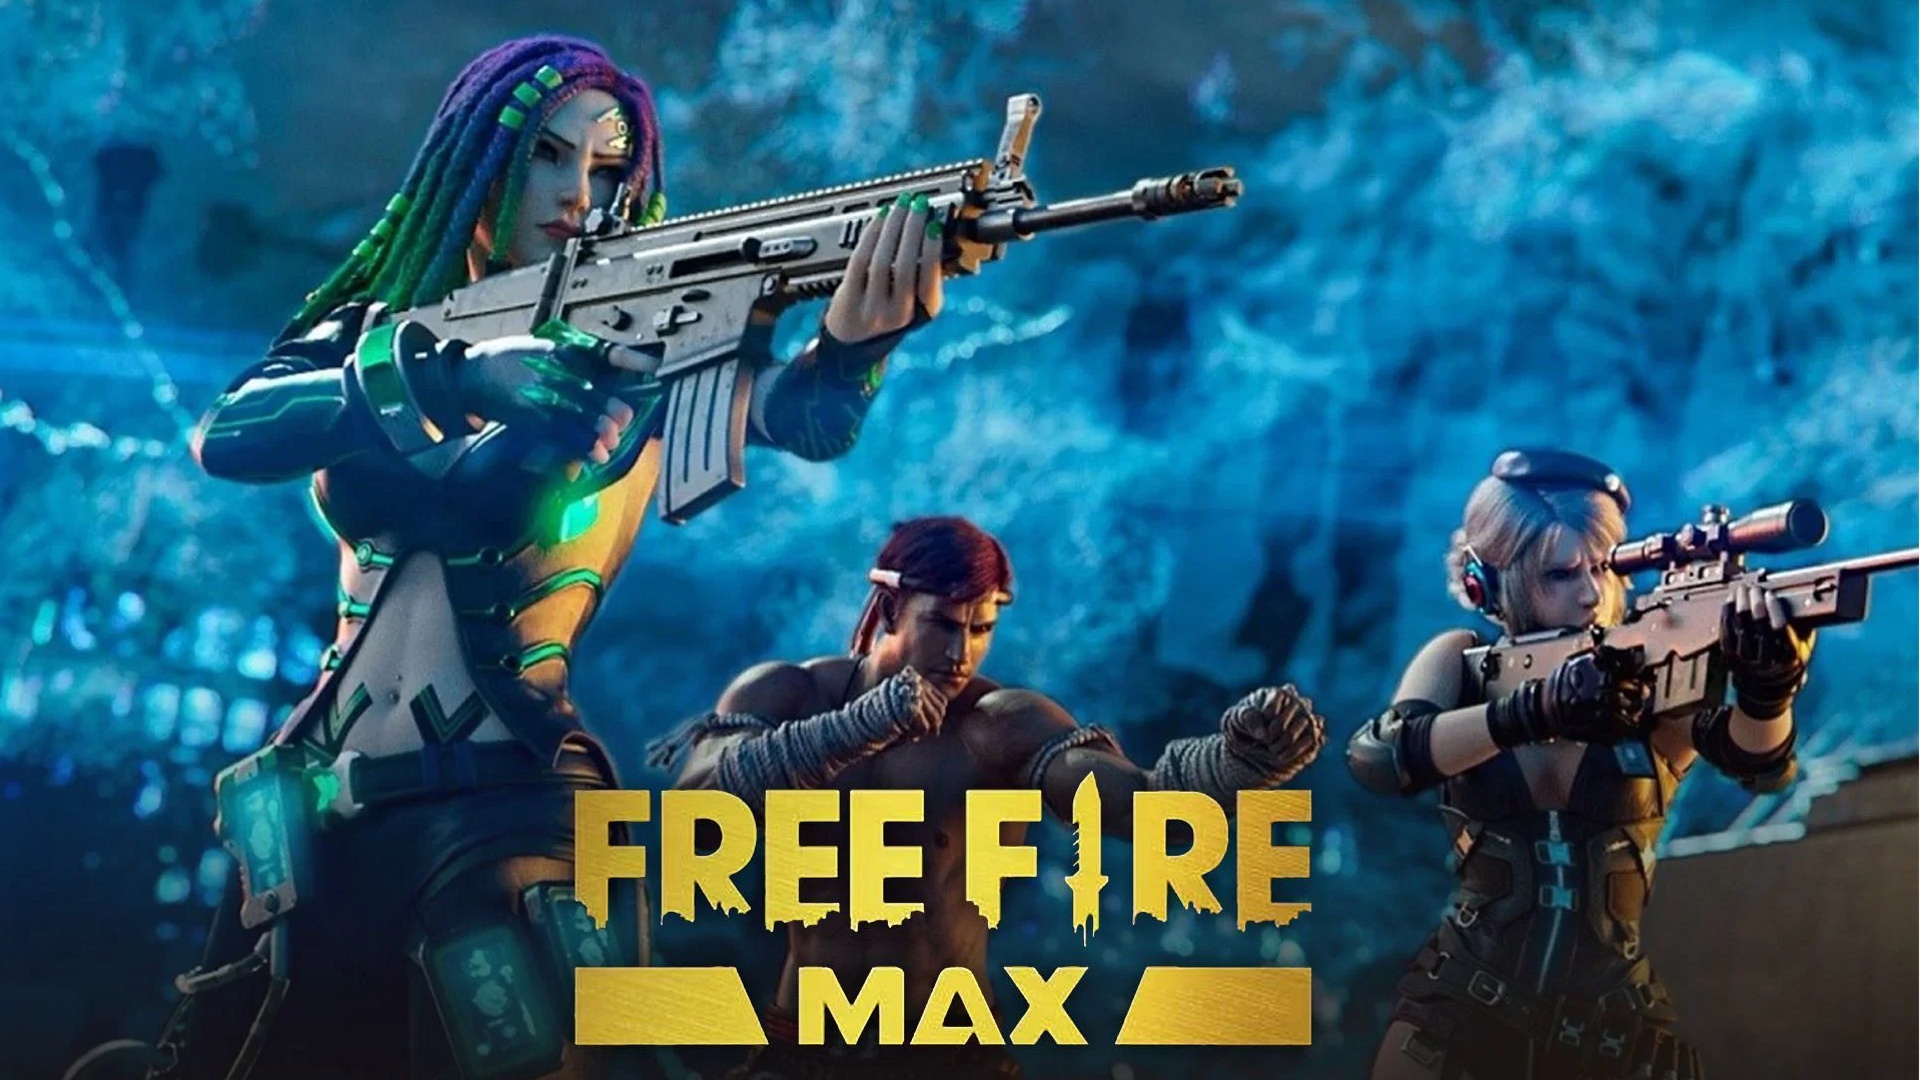 Garena Free Fire MAX codes for October 27: Redeem now